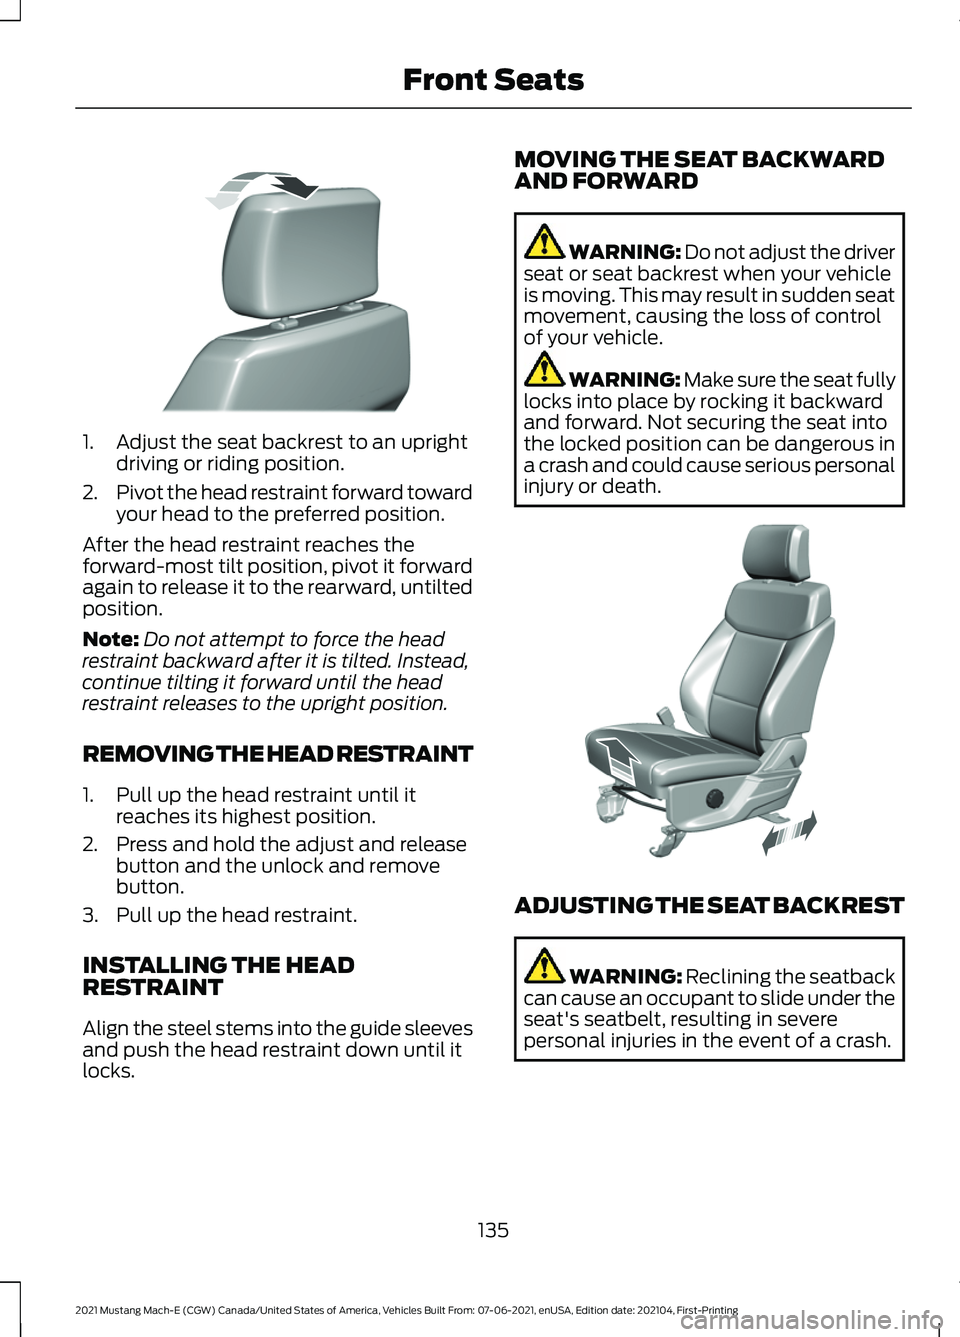 FORD MUSTANG MACH-E 2021  Owners Manual 1. Adjust the seat backrest to an upright
driving or riding position.
2. Pivot the head restraint forward toward
your head to the preferred position.
After the head restraint reaches the
forward-most 